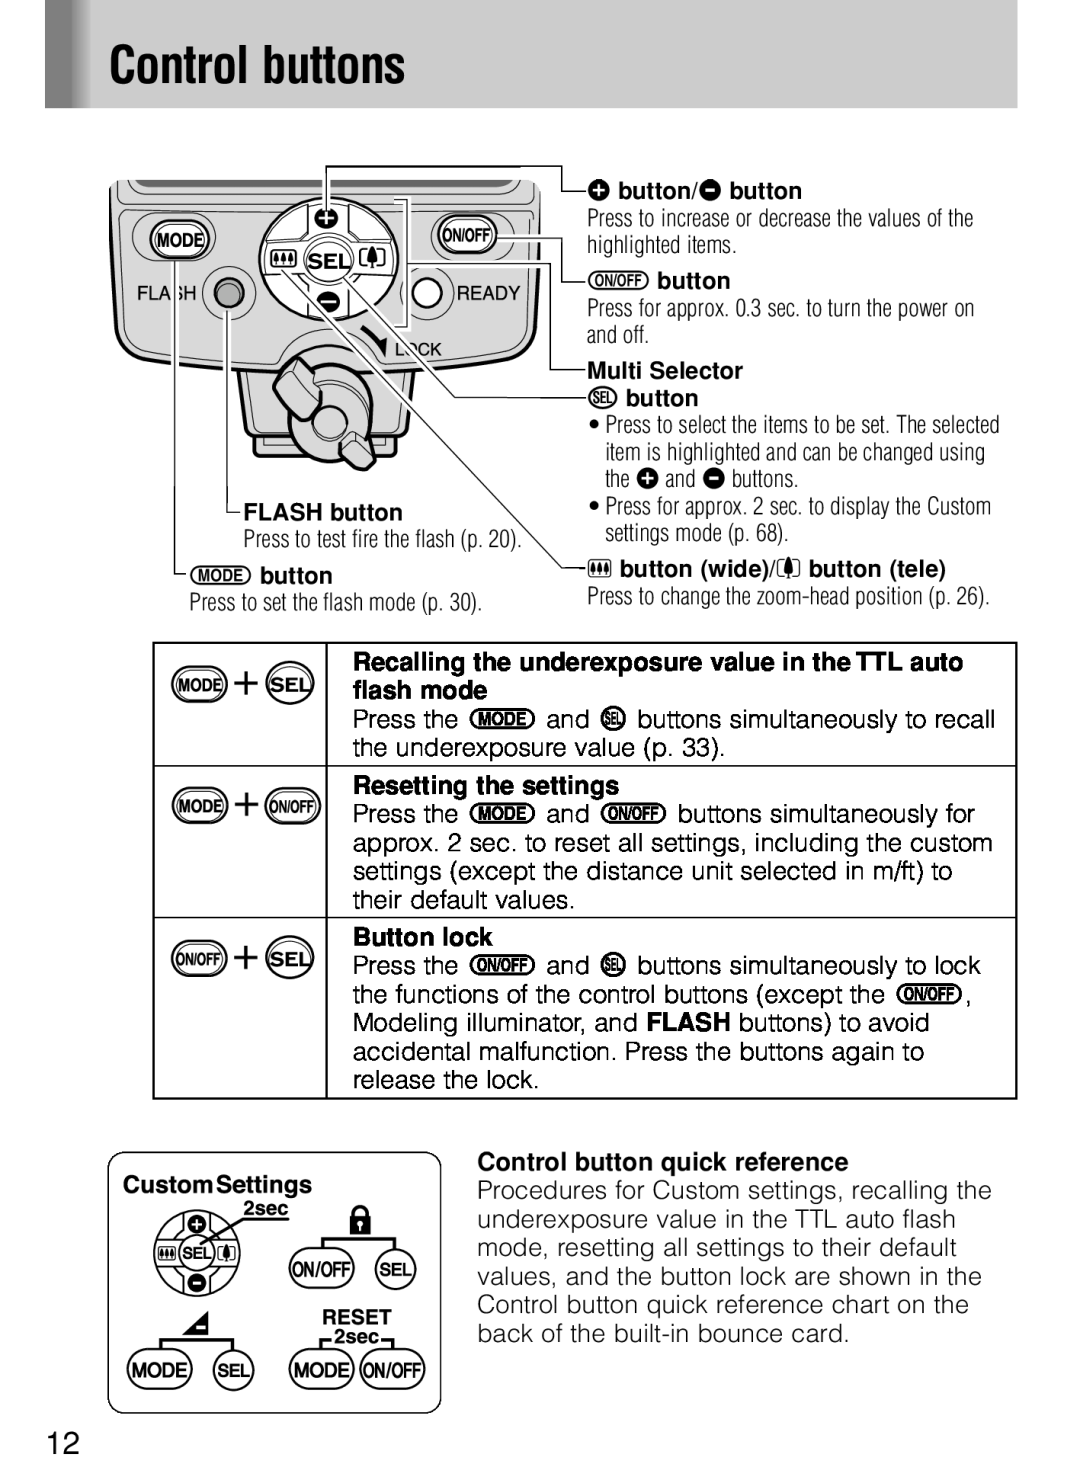 Nikon SB-800 instruction manual Press to set the flash mode p, Control buttons, Button lock, Resetting the settings 